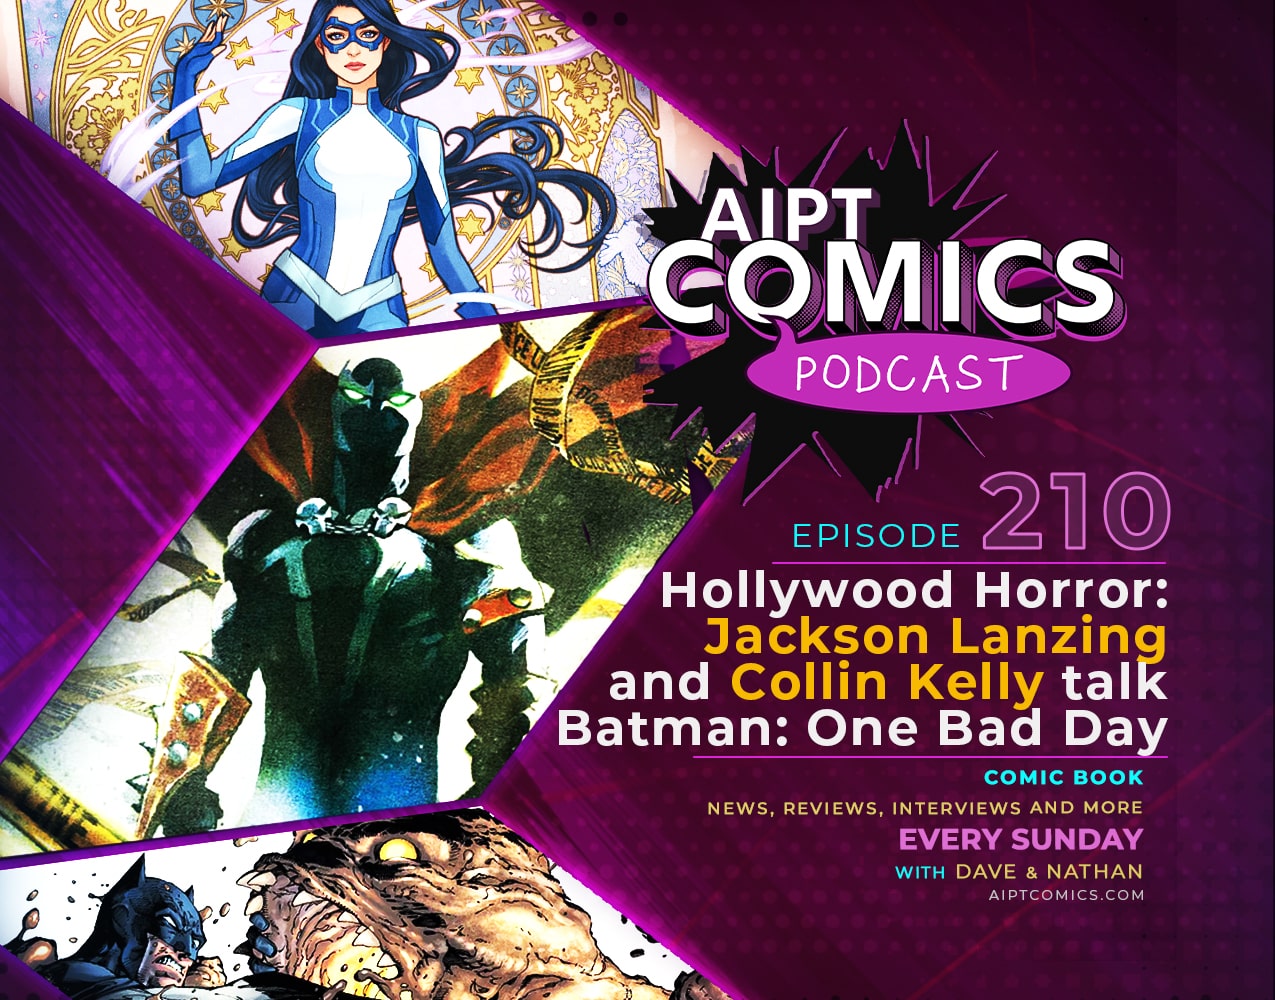 AIPT Comics Podcast episode 210: Hollywood Horror: Jackson Lanzing and Collin Kelly talk 'Batman: One Bad Day'